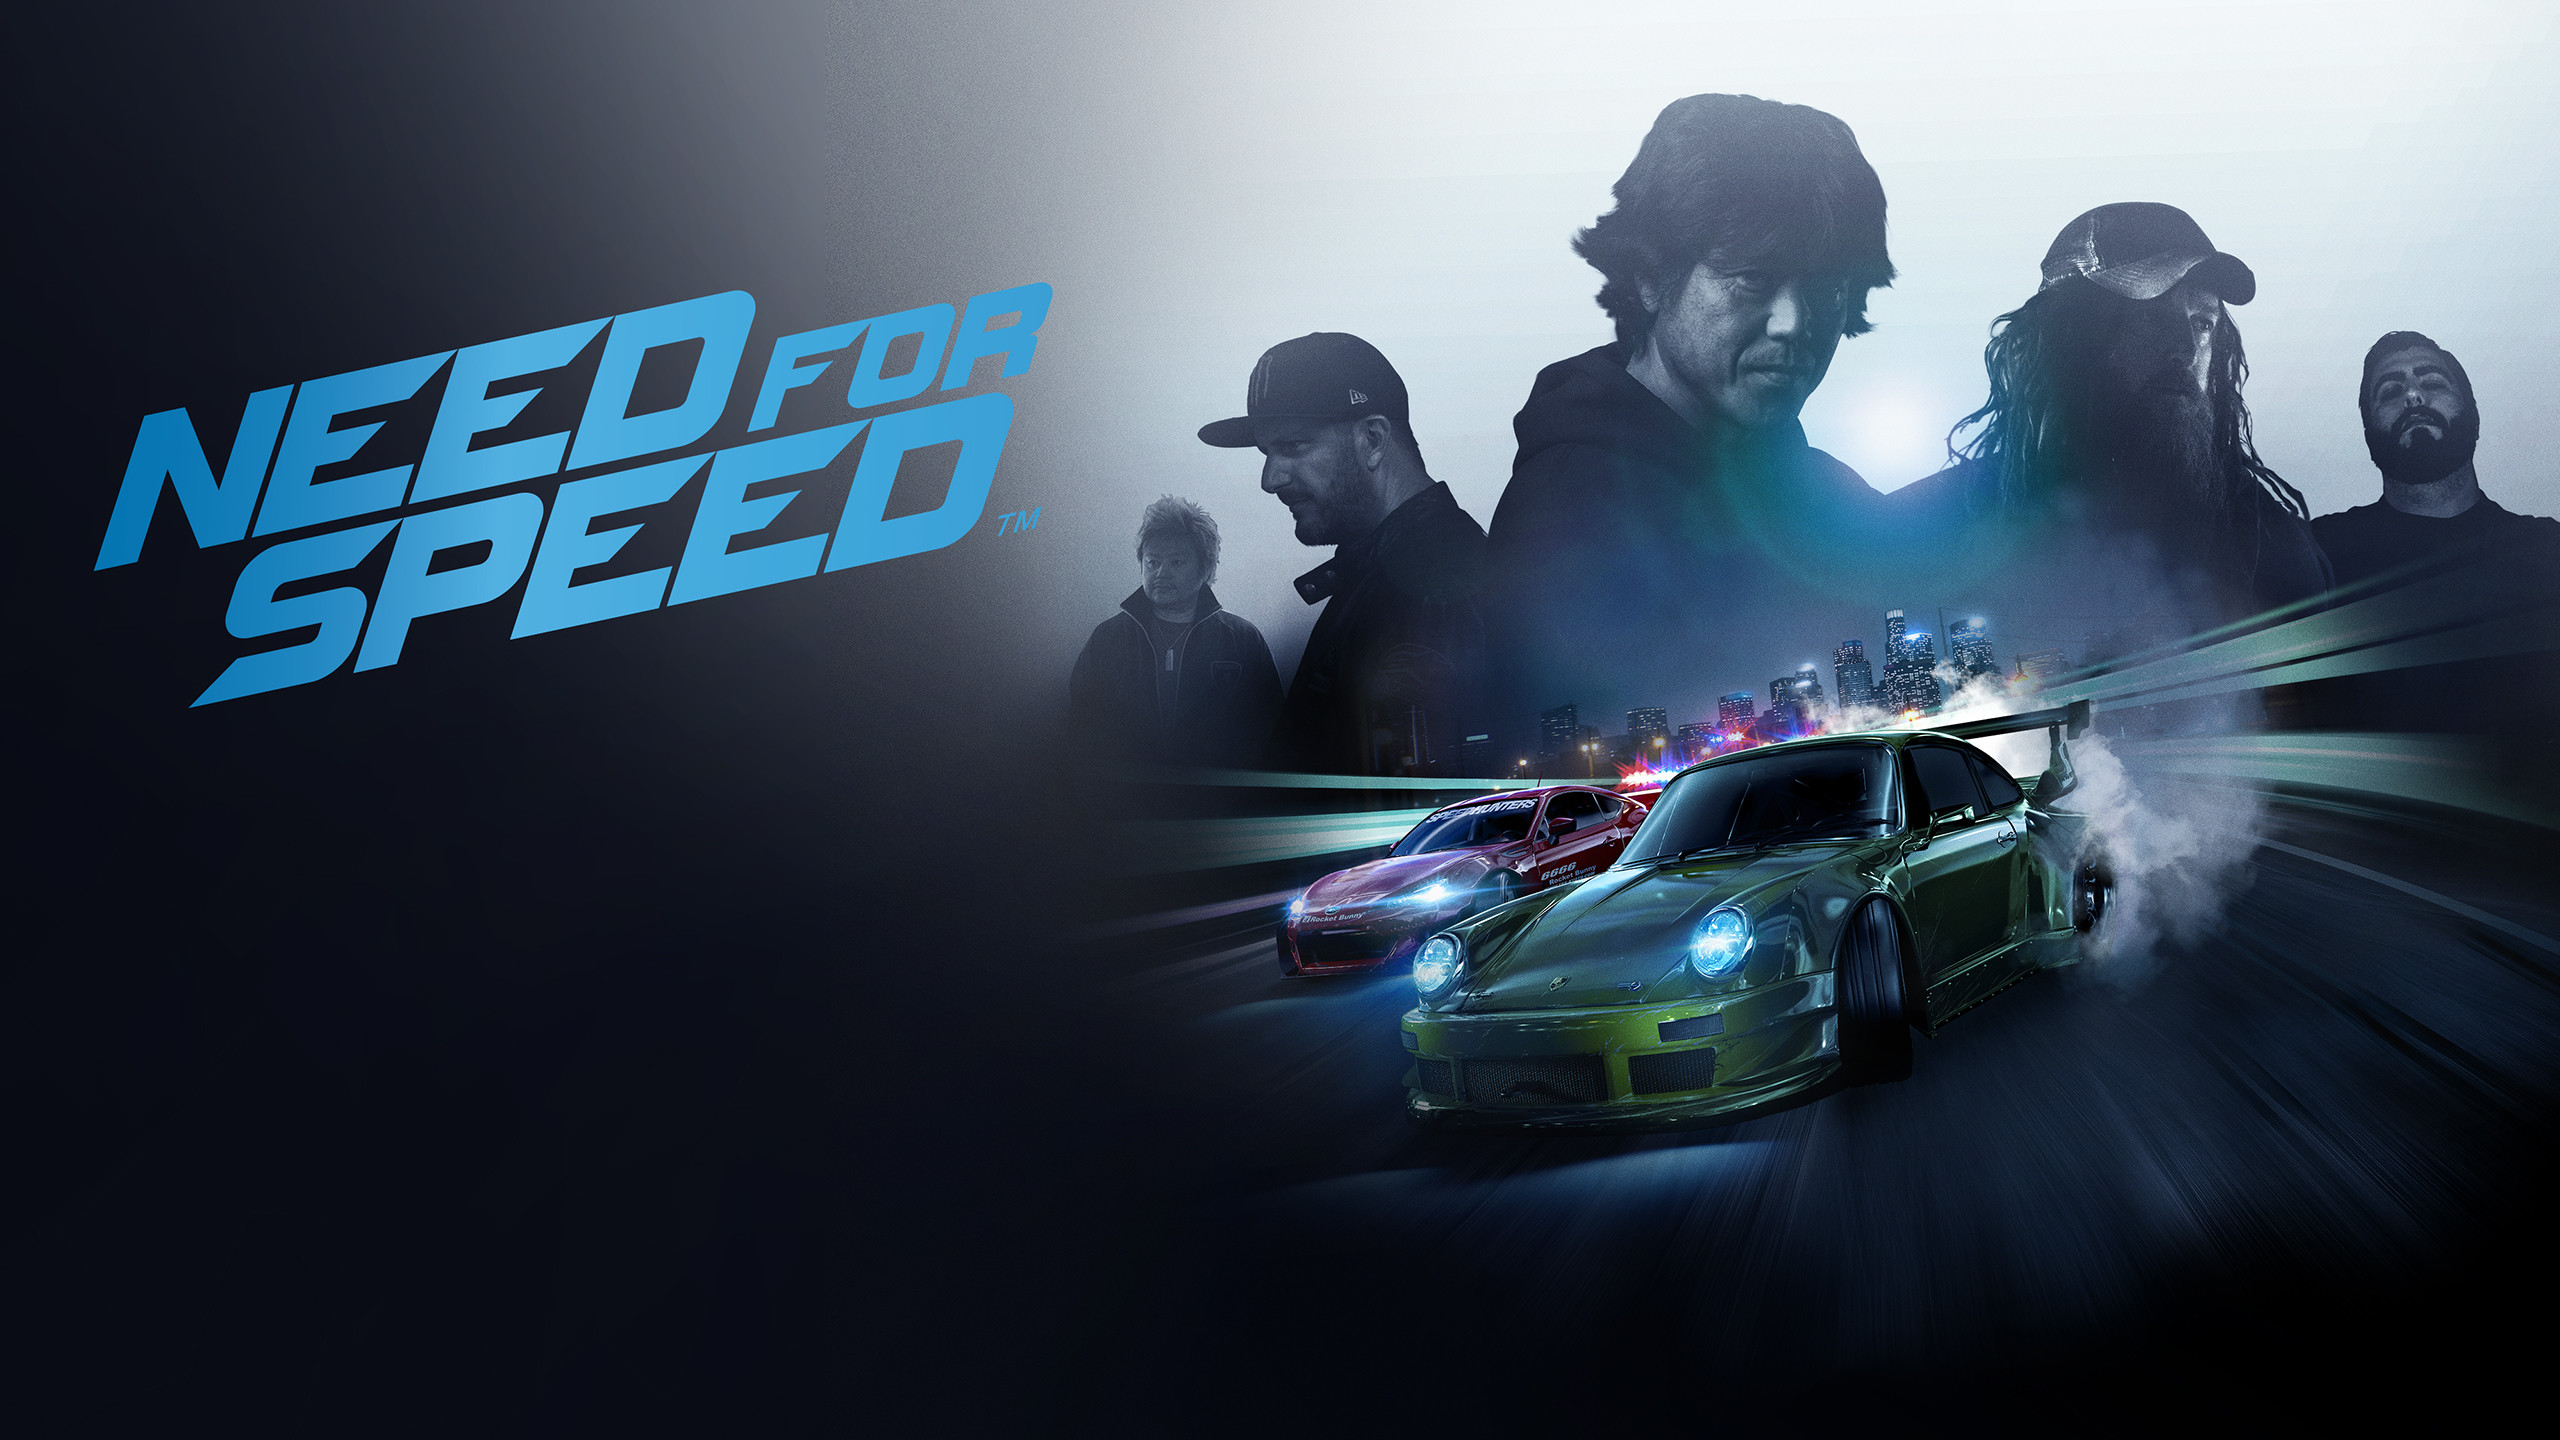 2560x1440 Need For Speed 2015 Wallpaper